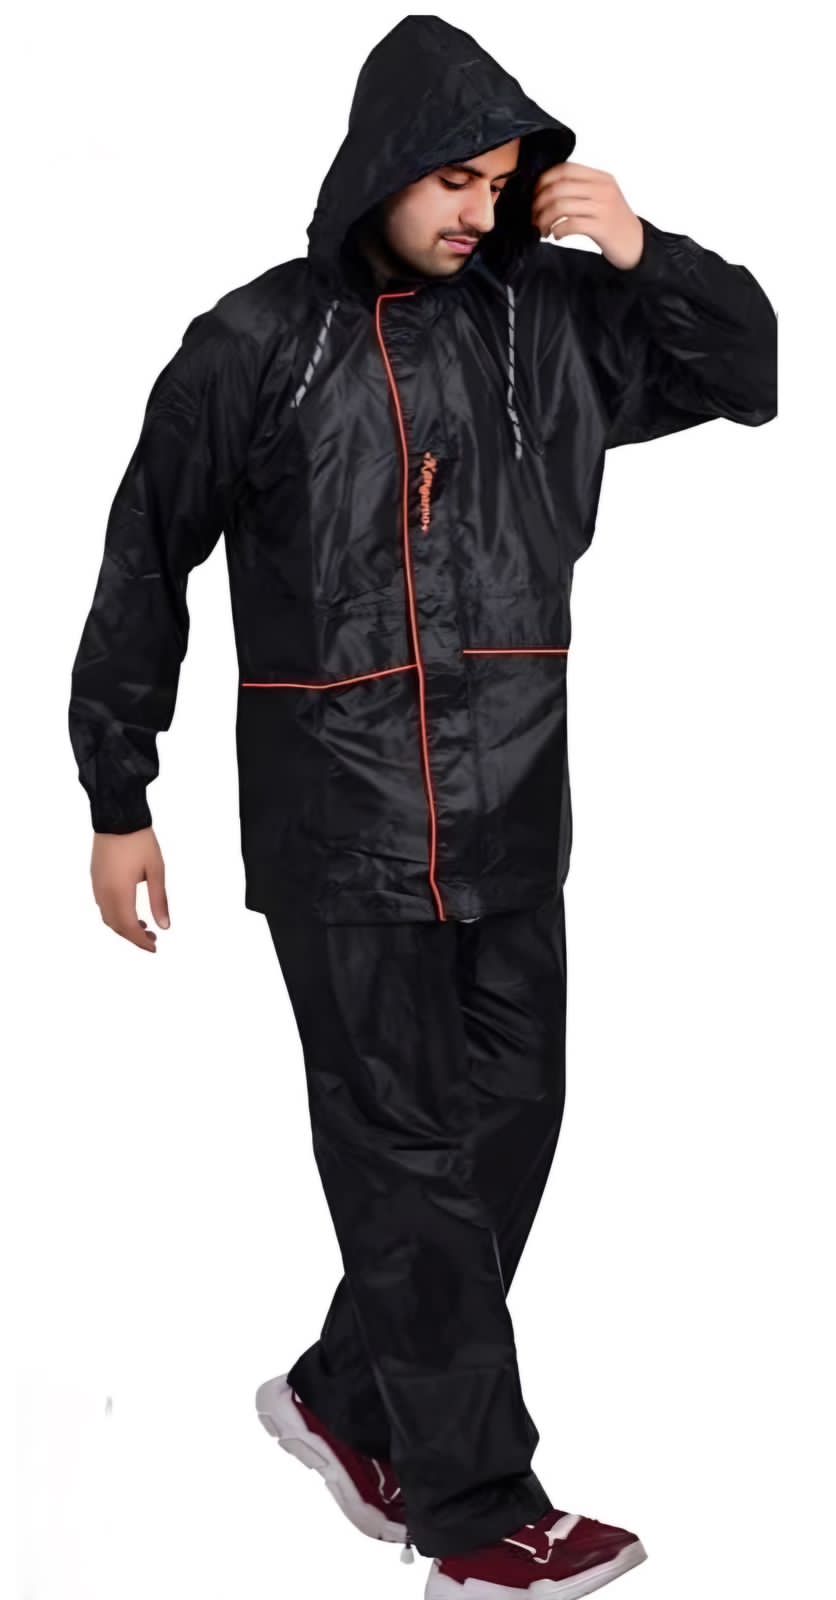 Details View - Rain suit  photos - reseller,reseller marketplace,advetising your products,reseller bazzar,resellerbazzar.in,india's classified site,Rain suit in surat, Rain suit, Rain suit in vadodara ,Rain suit in Gujarat , Best Rain suit online